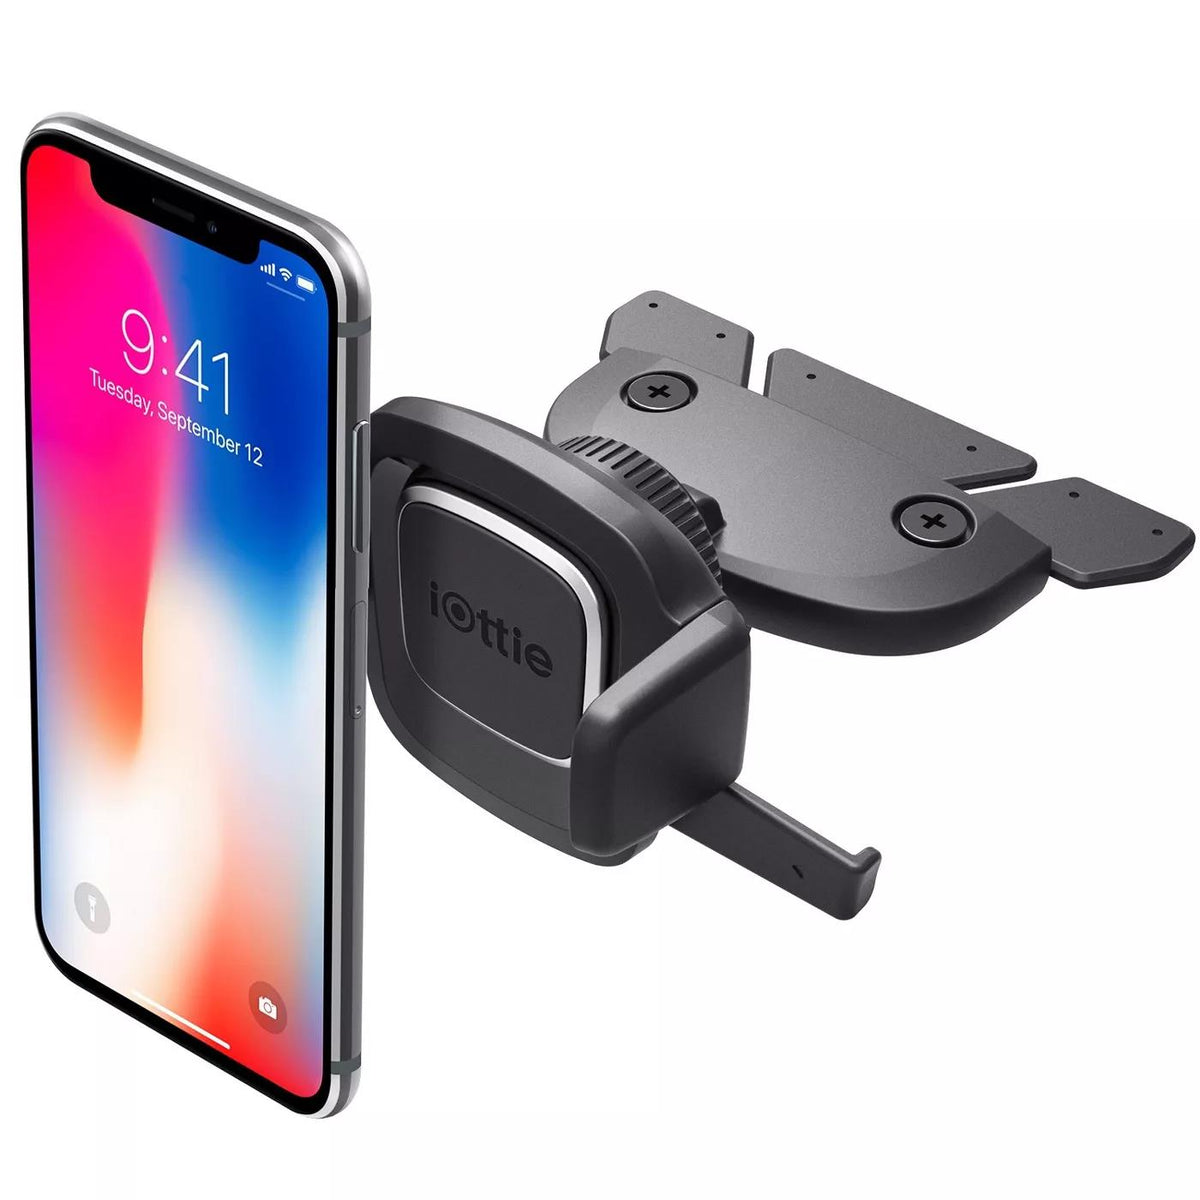 iOttie's new Easy One Touch 6 iPhone car mount see first discounts from $21  (Reg. $30)